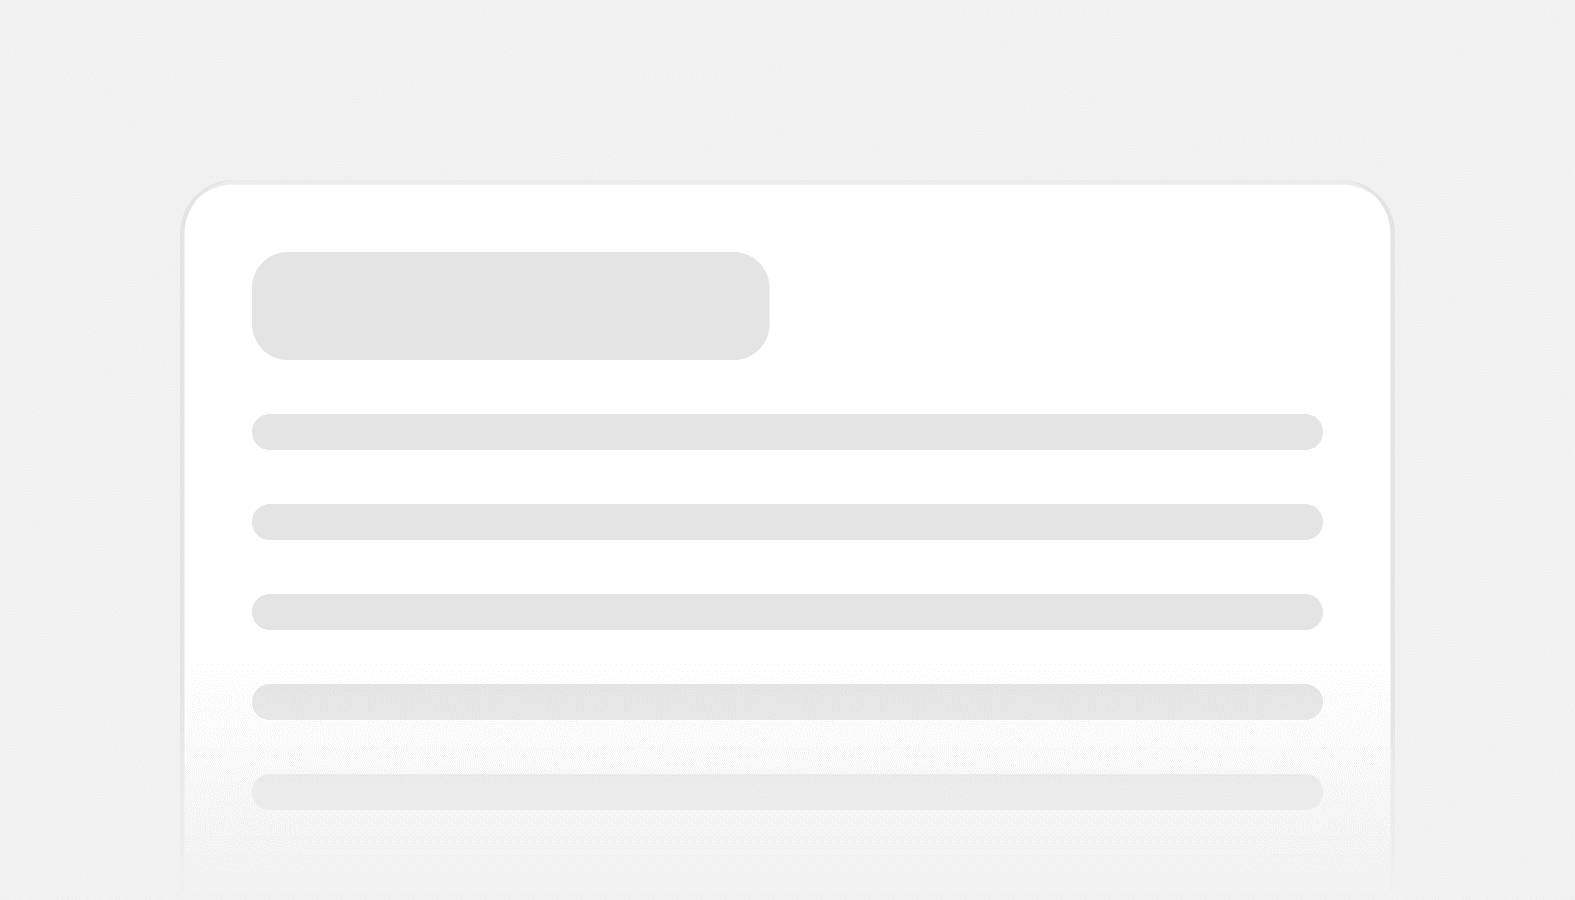 Screenshot of the Skeleton page component